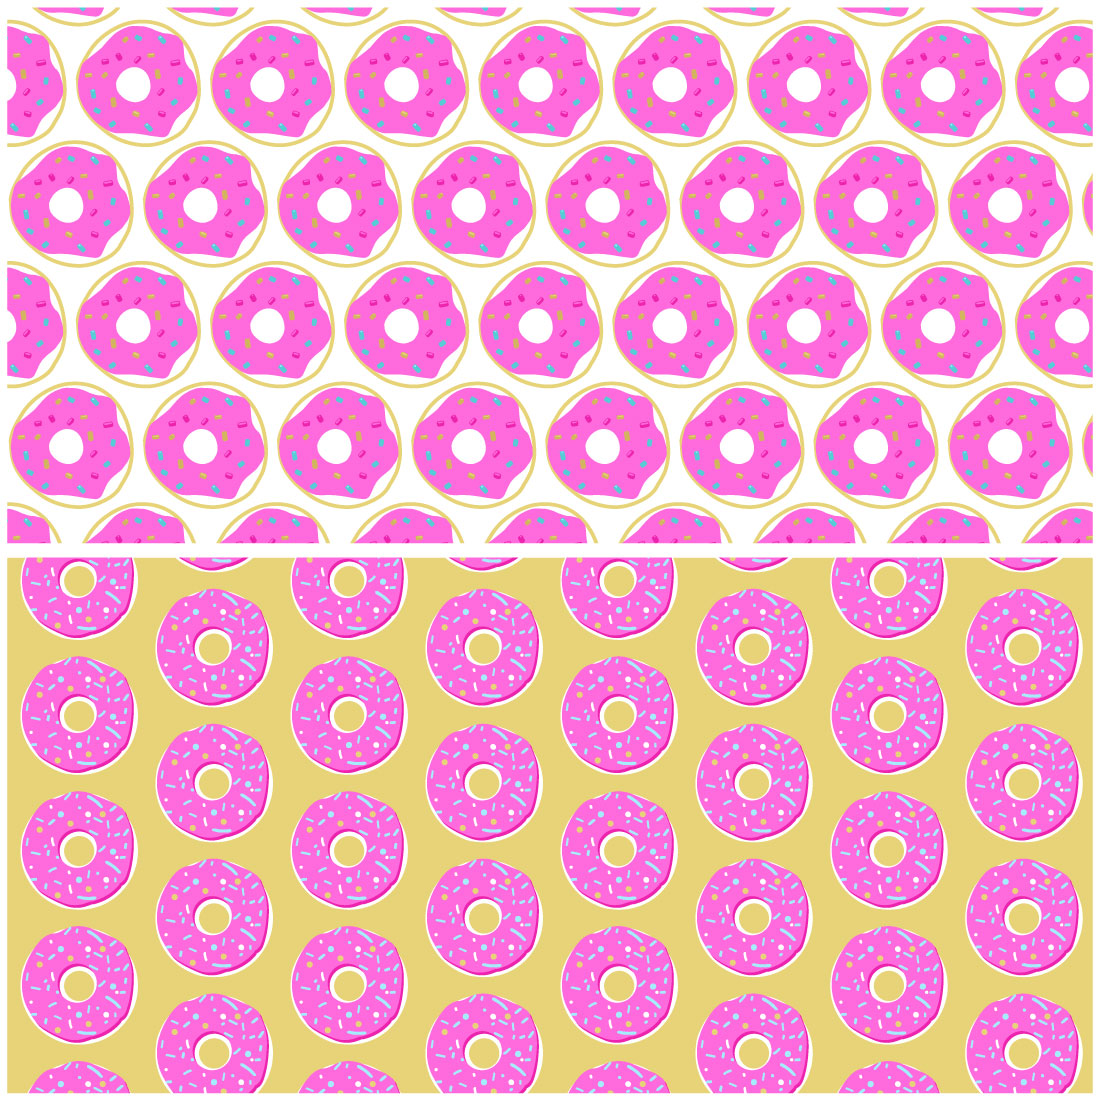 Sprinkles Donuts Patterns preview image.